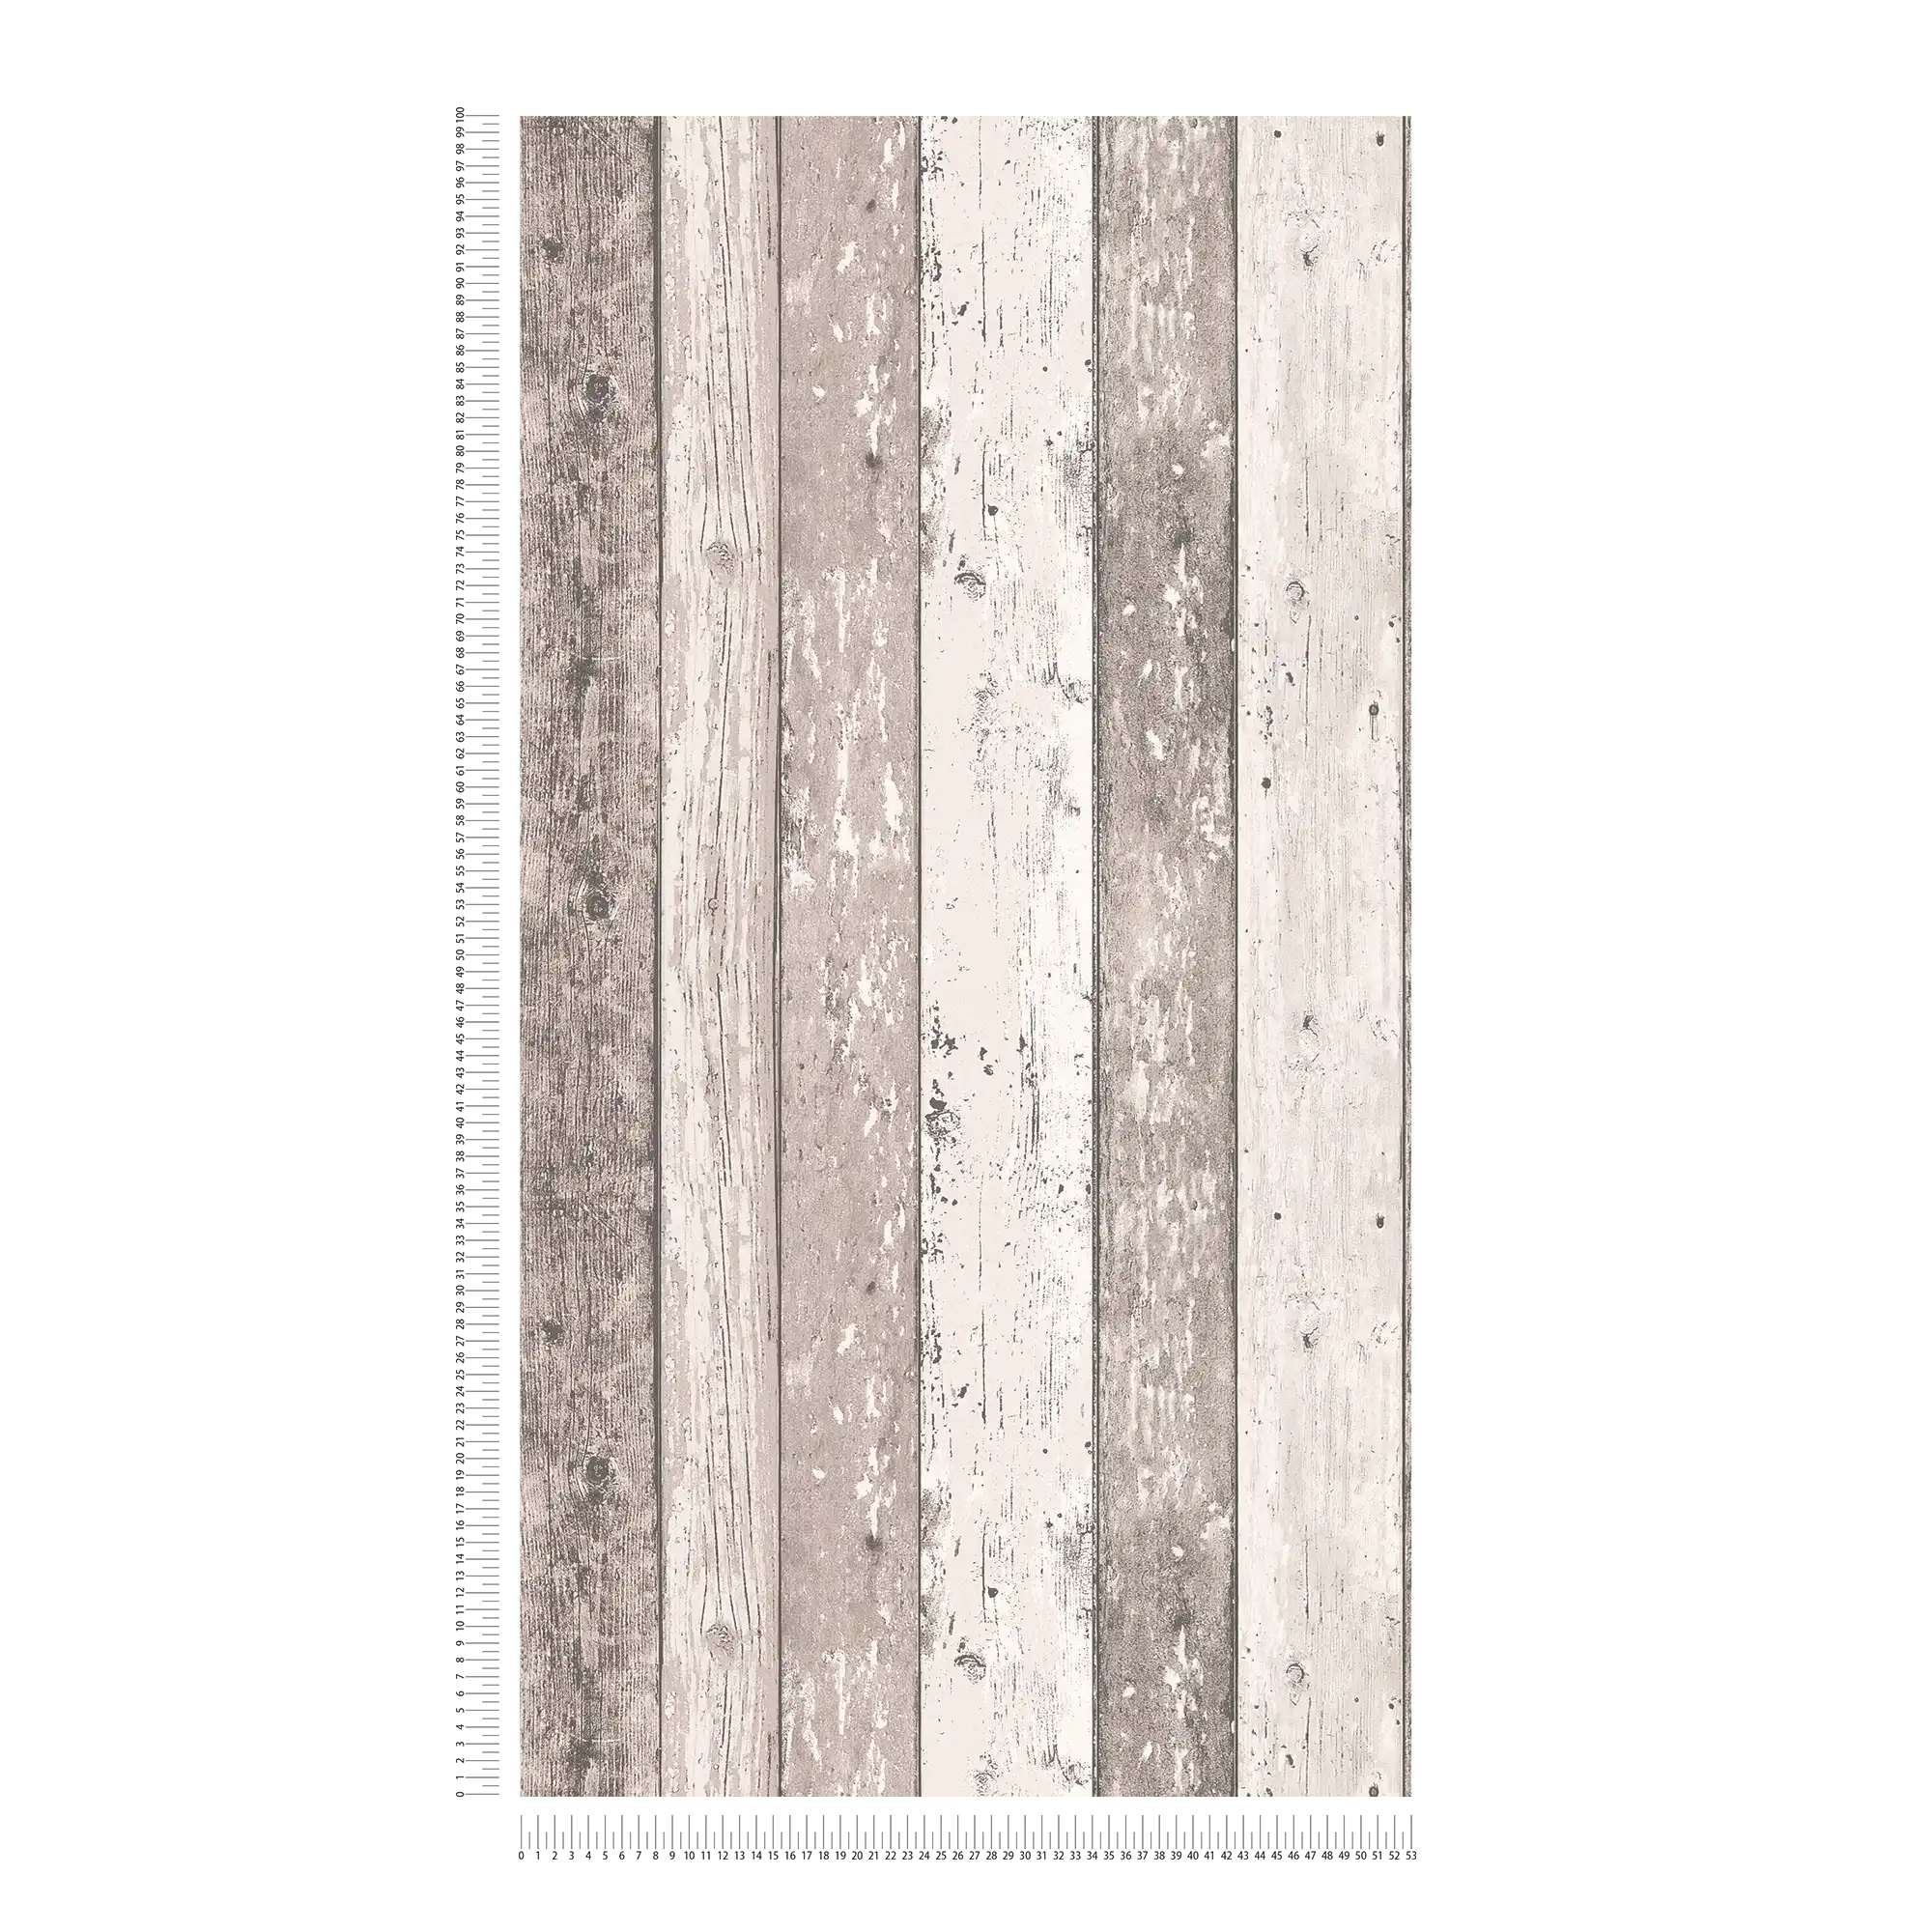             Boards wallpaper with wood optics in used look - brown, cream
        